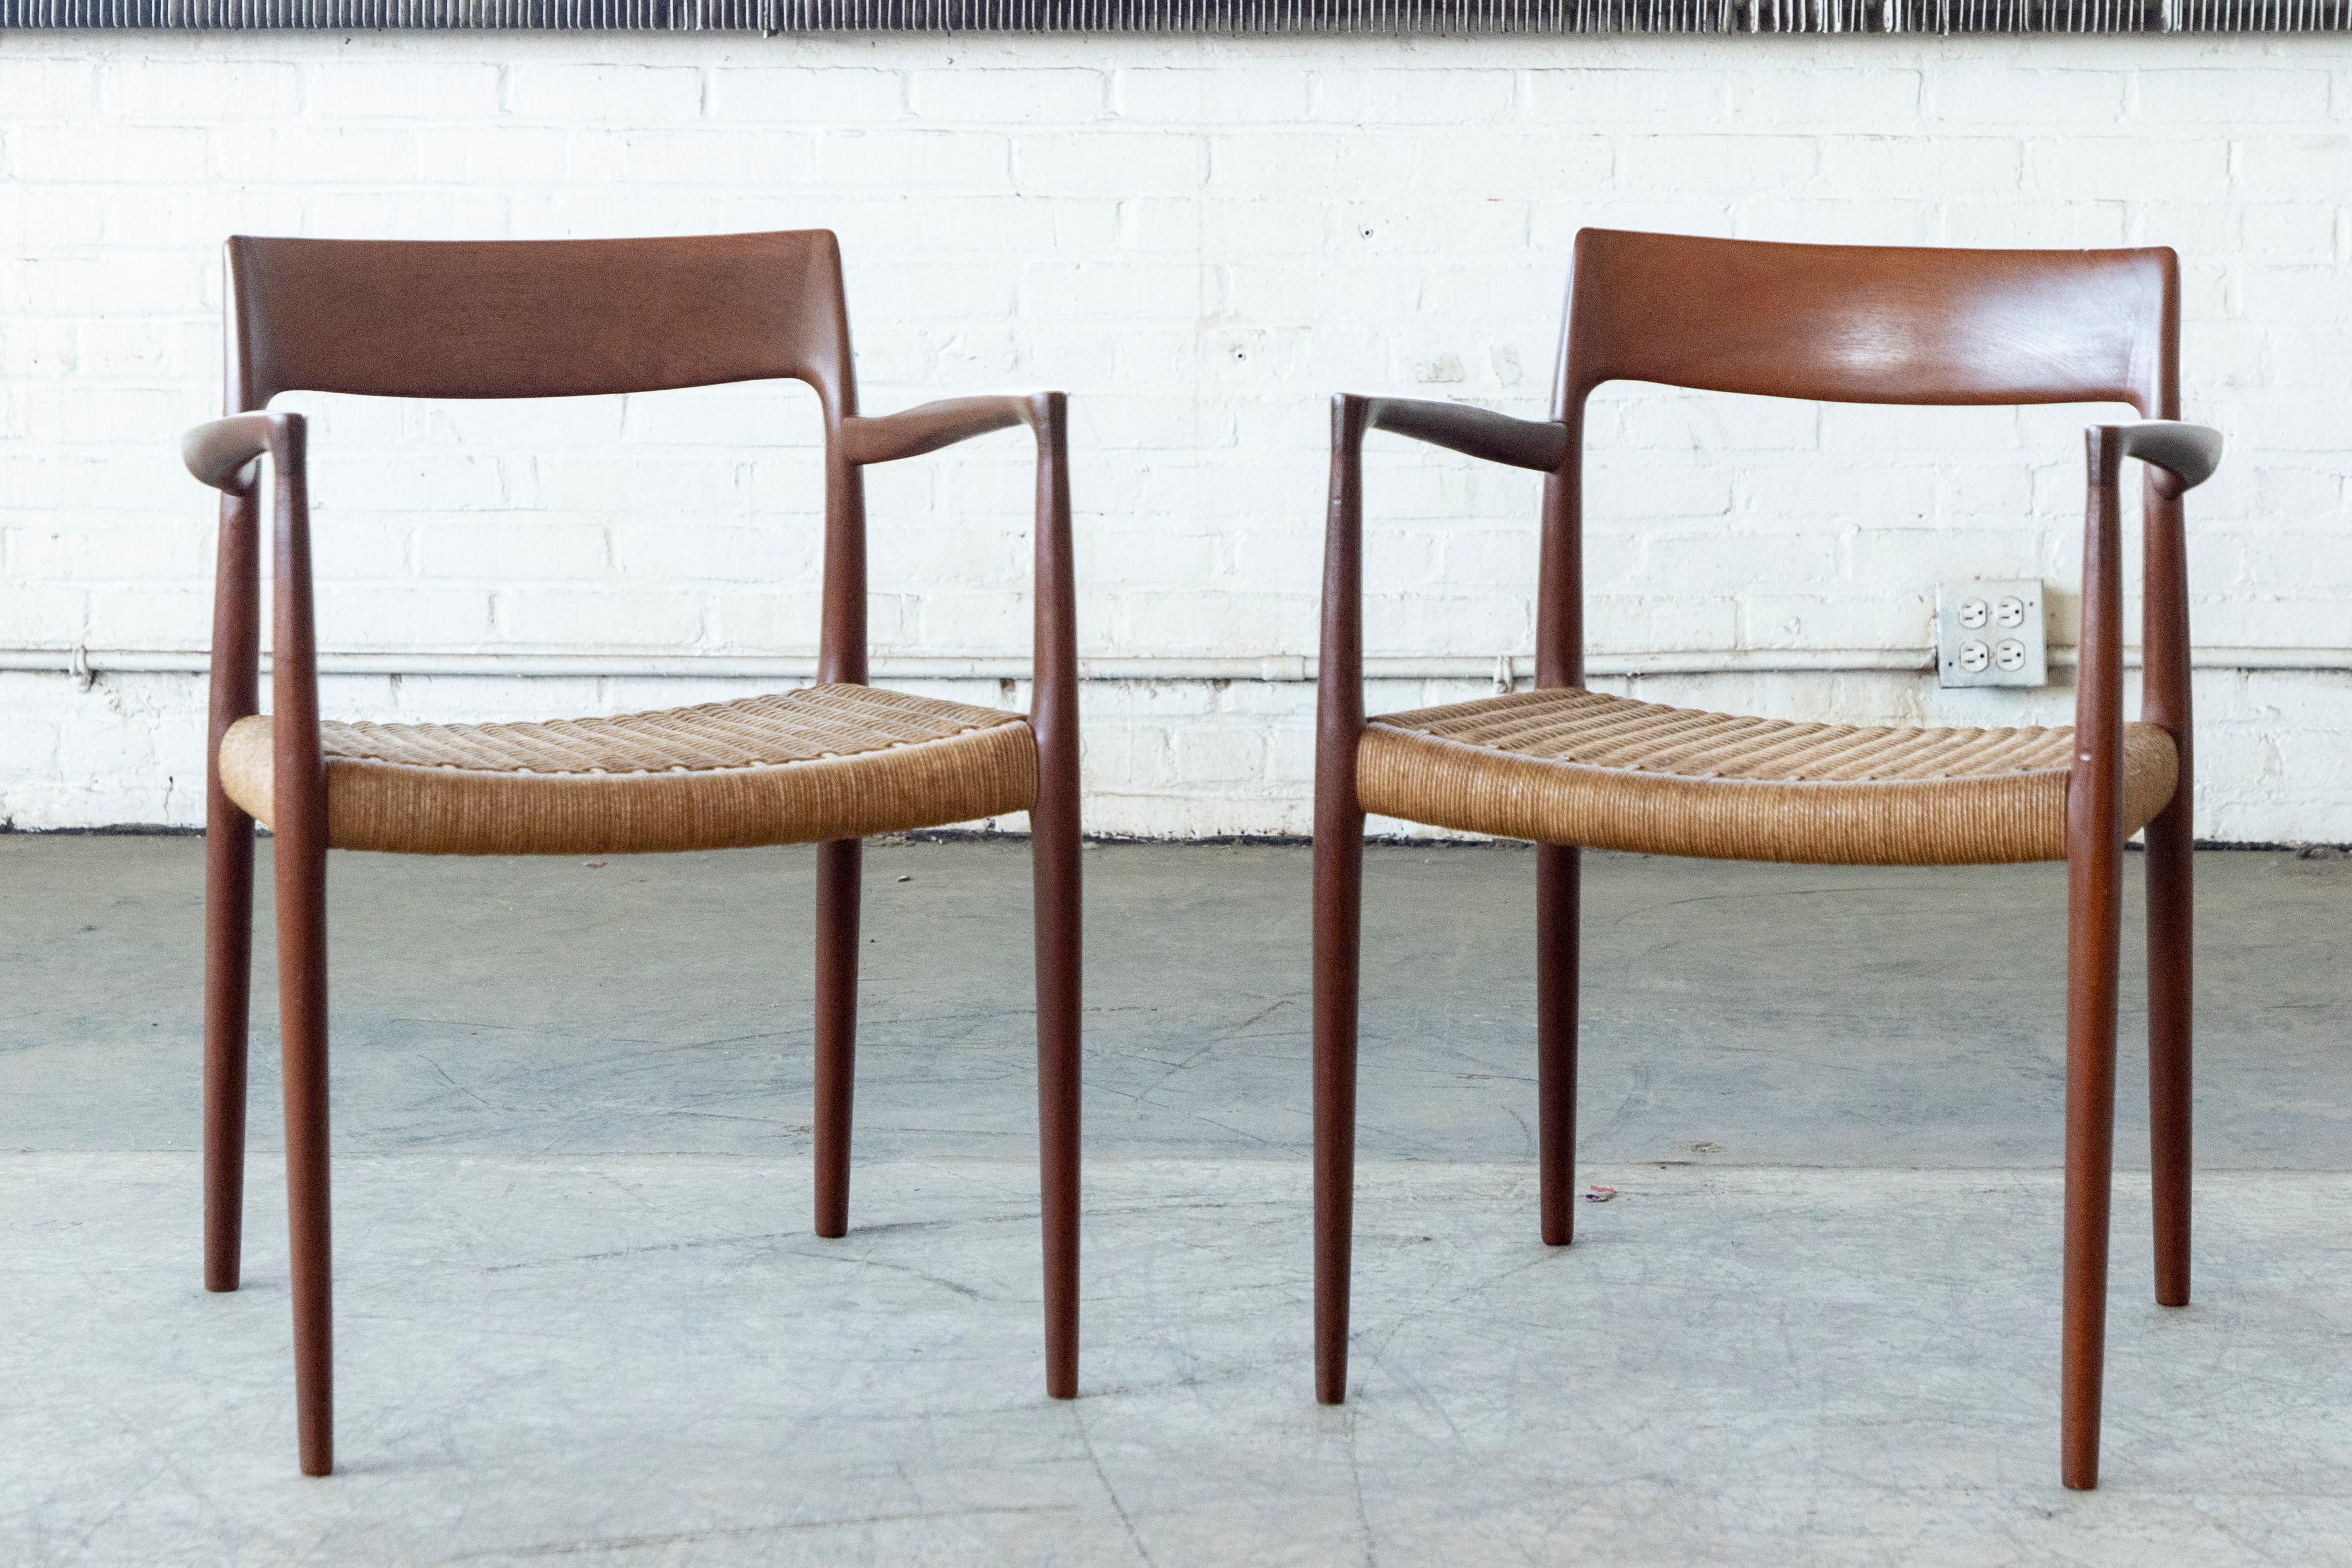 This wonderful Danish modern teak armchair by NO Moller was designed in 1950's for J.L. Møllers Møbelfabrik. The chairs retain the original paper cord in very good condition. A truly classic midcentury Danish design to upgrade any room. Signed with